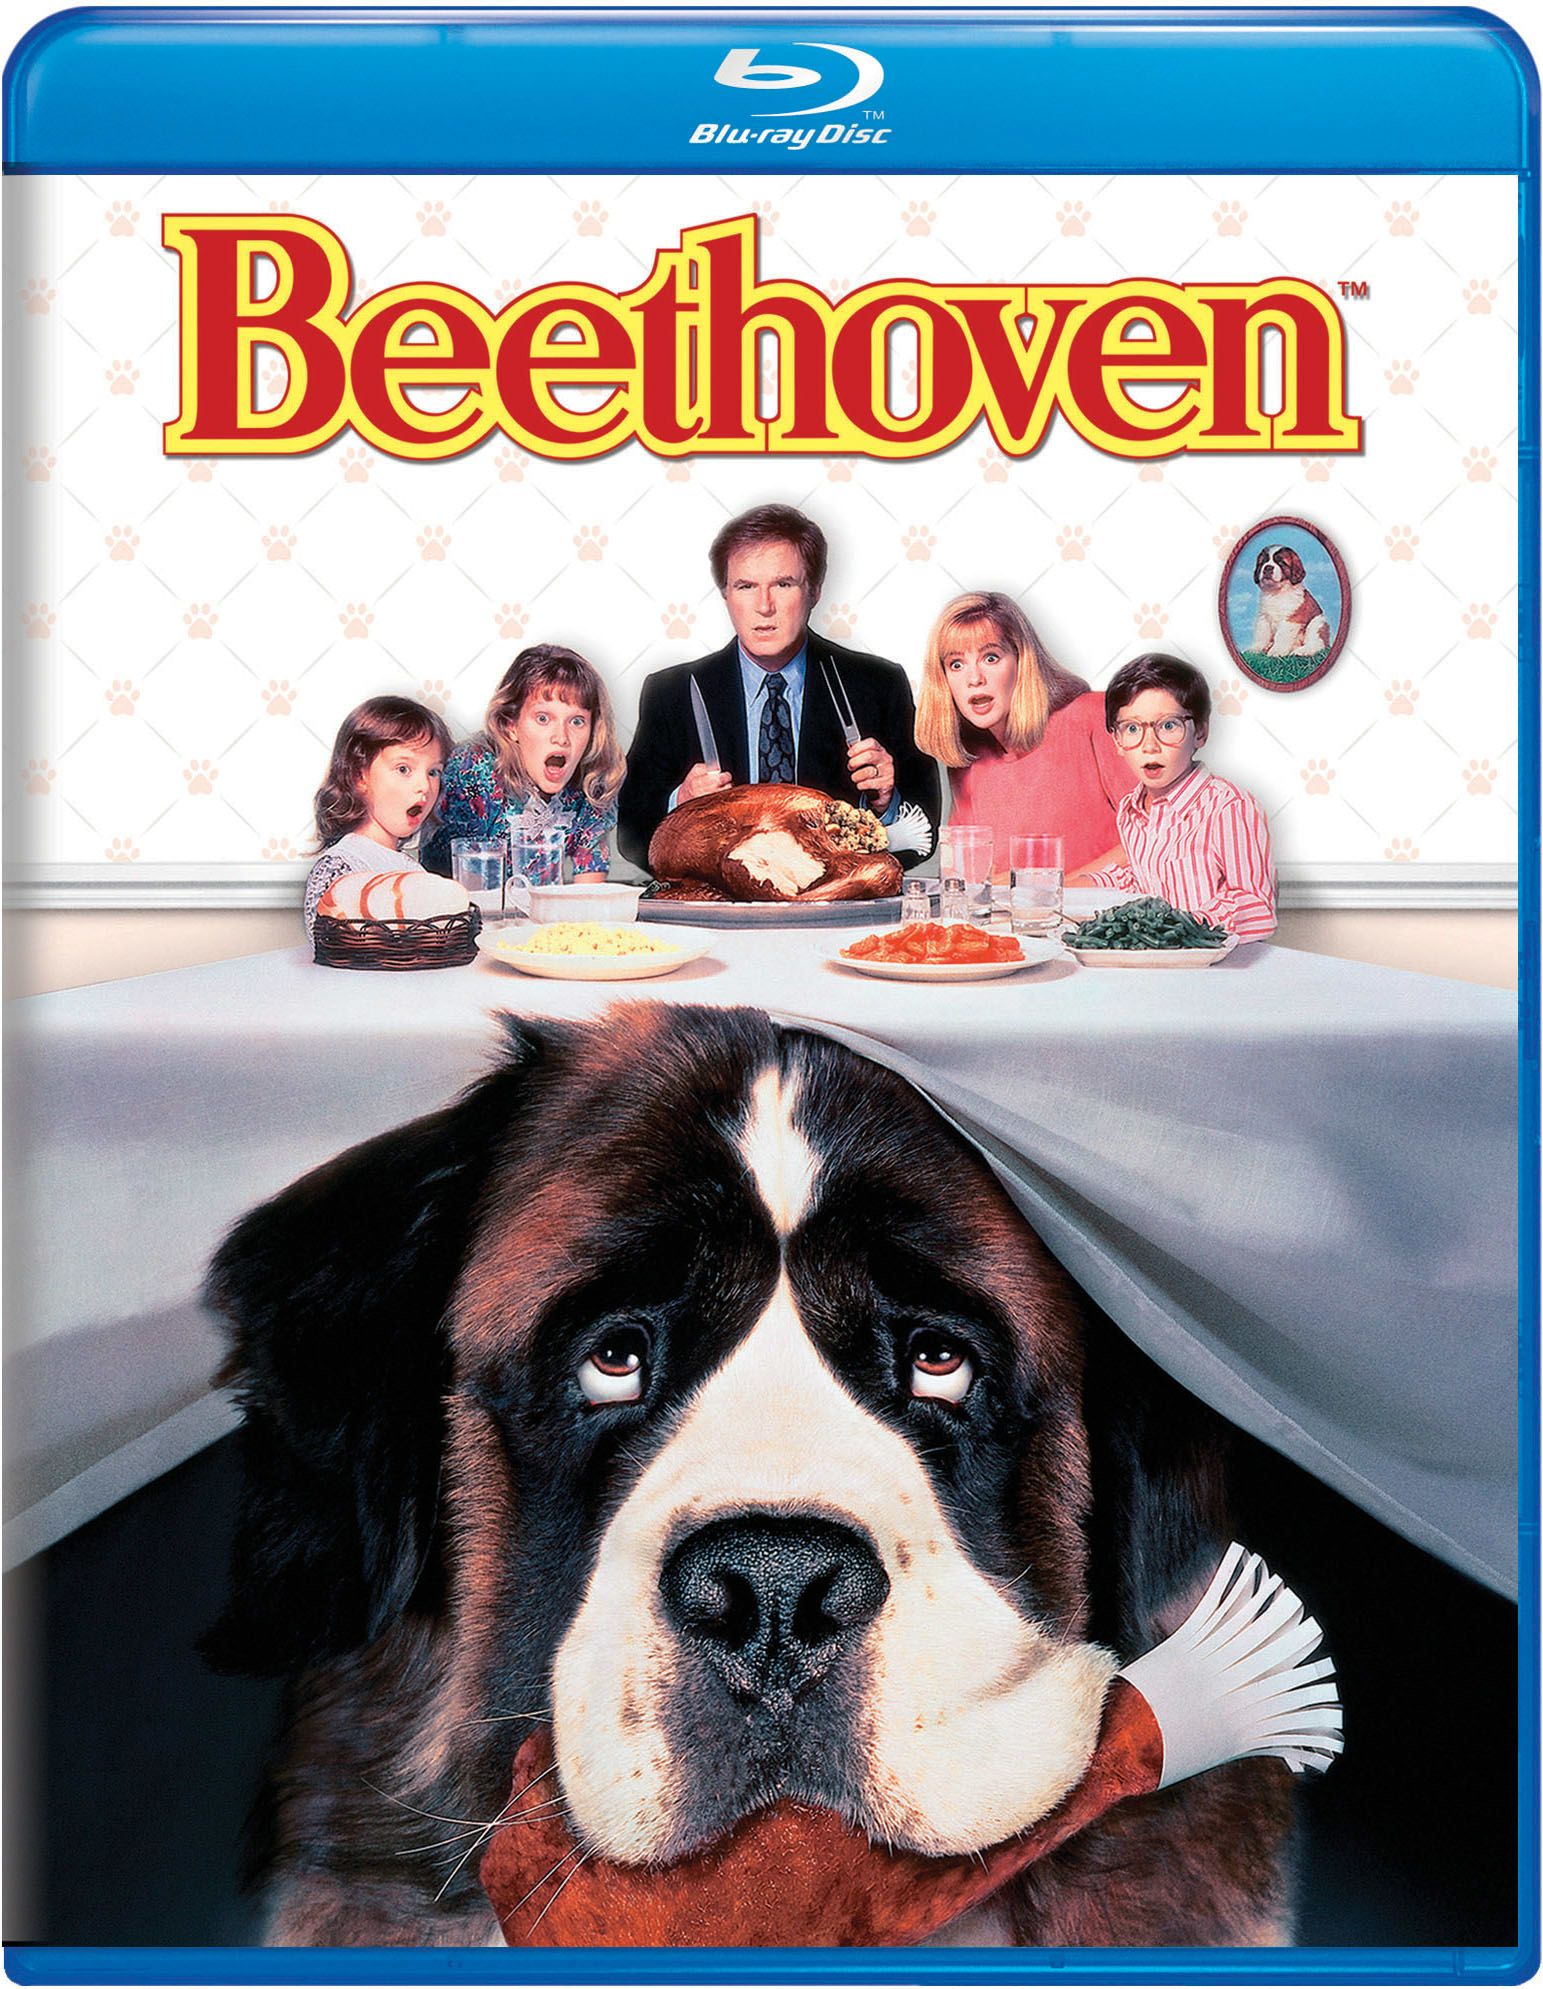 Beethoven - Blu-ray [ 1992 ]  - Comedy Movies On Blu-ray - Movies On GRUV